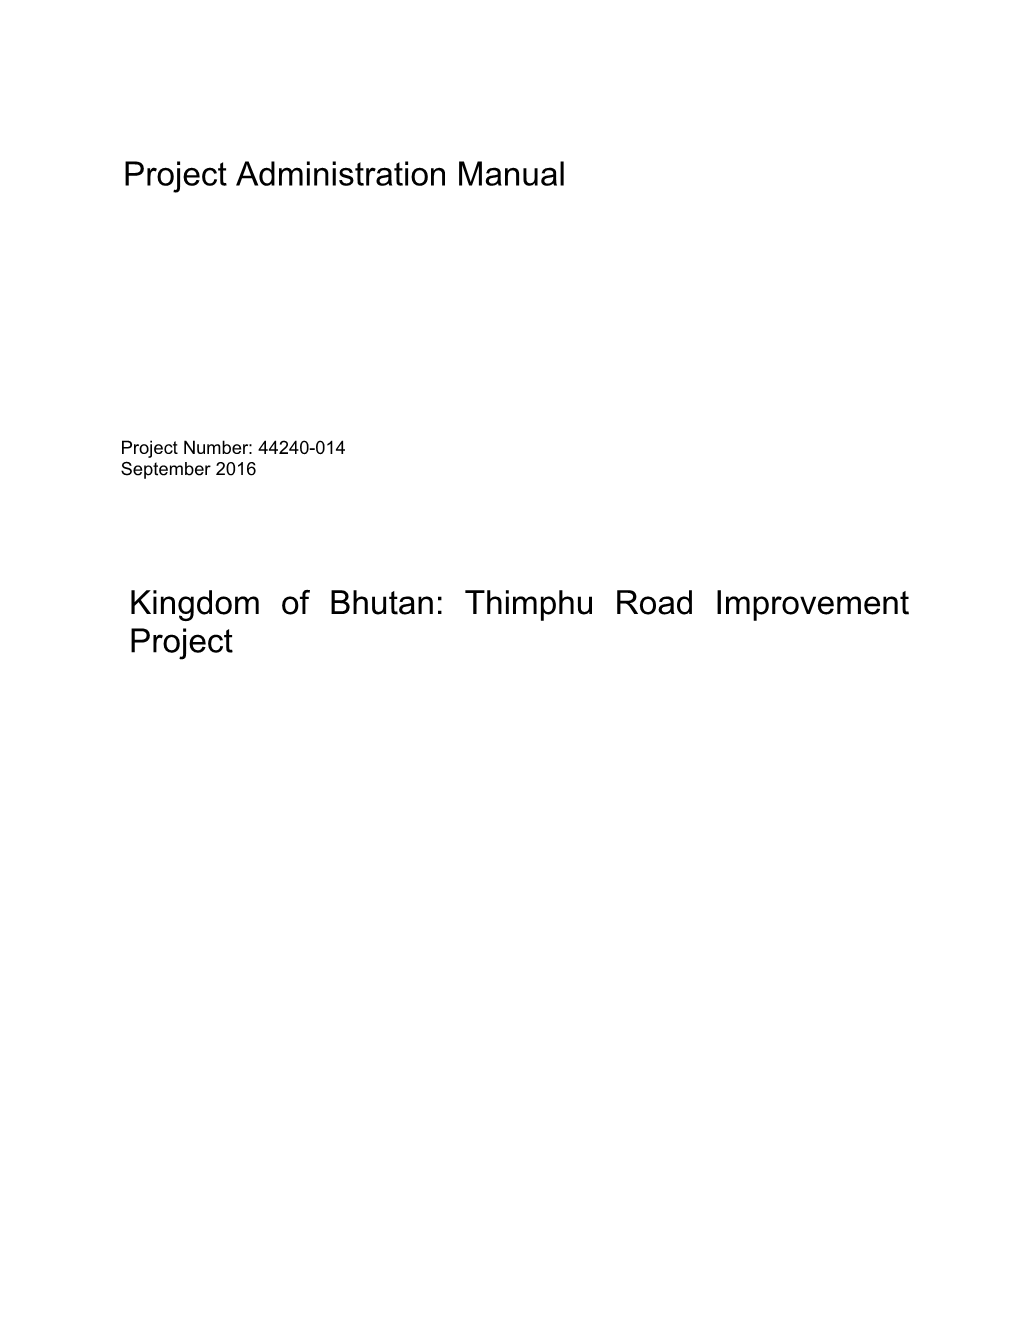 Thimphu Road Improvement Project Project Administration Manual